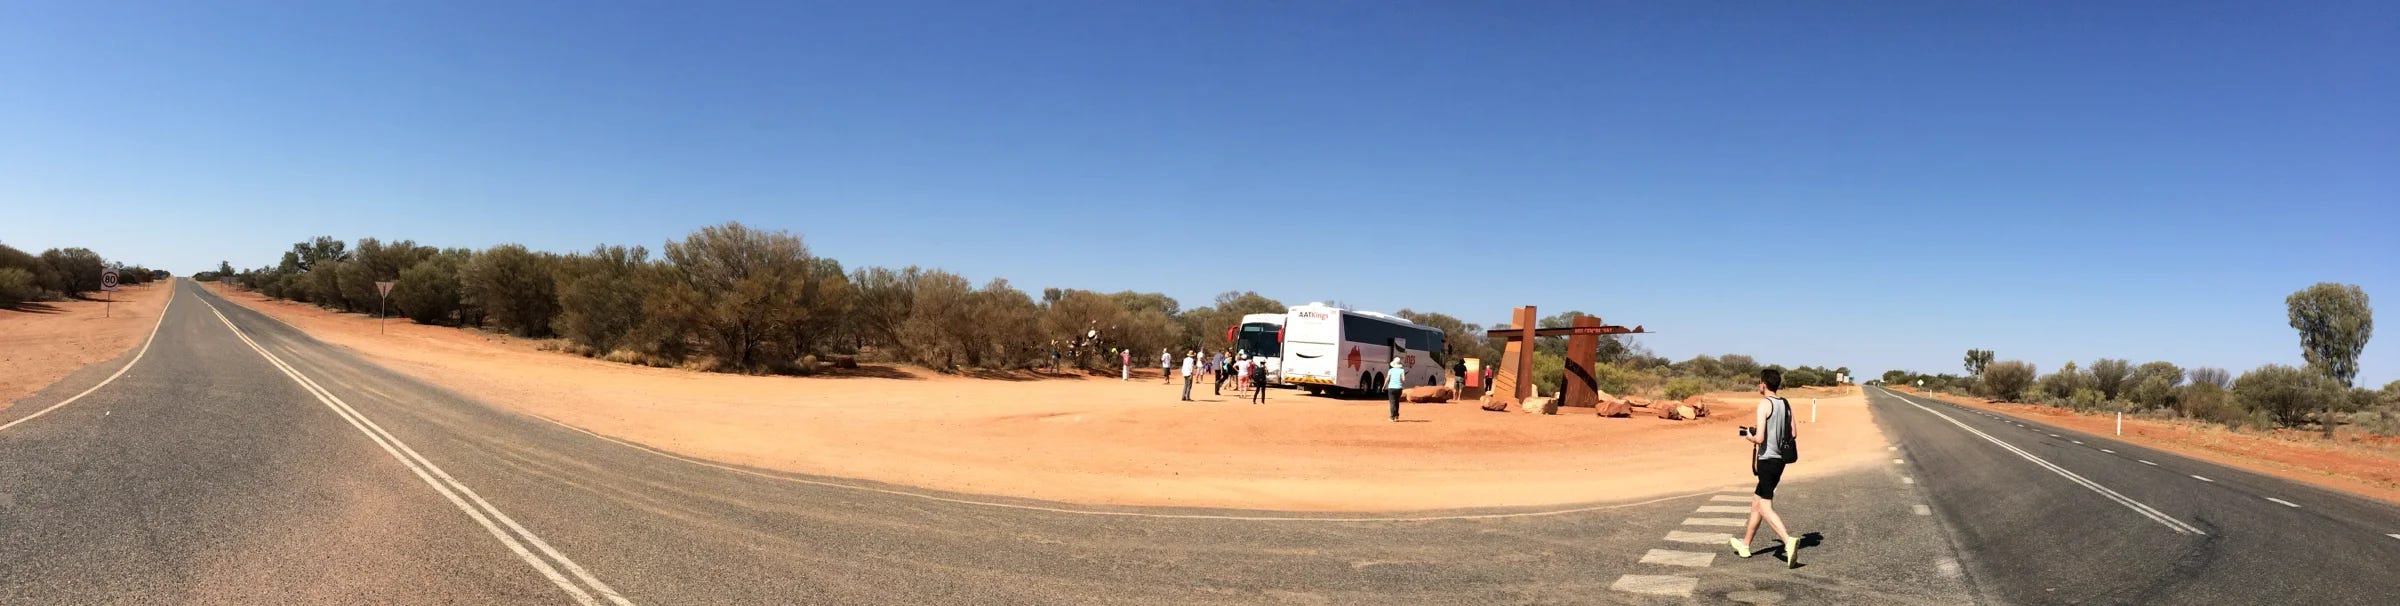 A coach stop at a road intersection in Central Australia